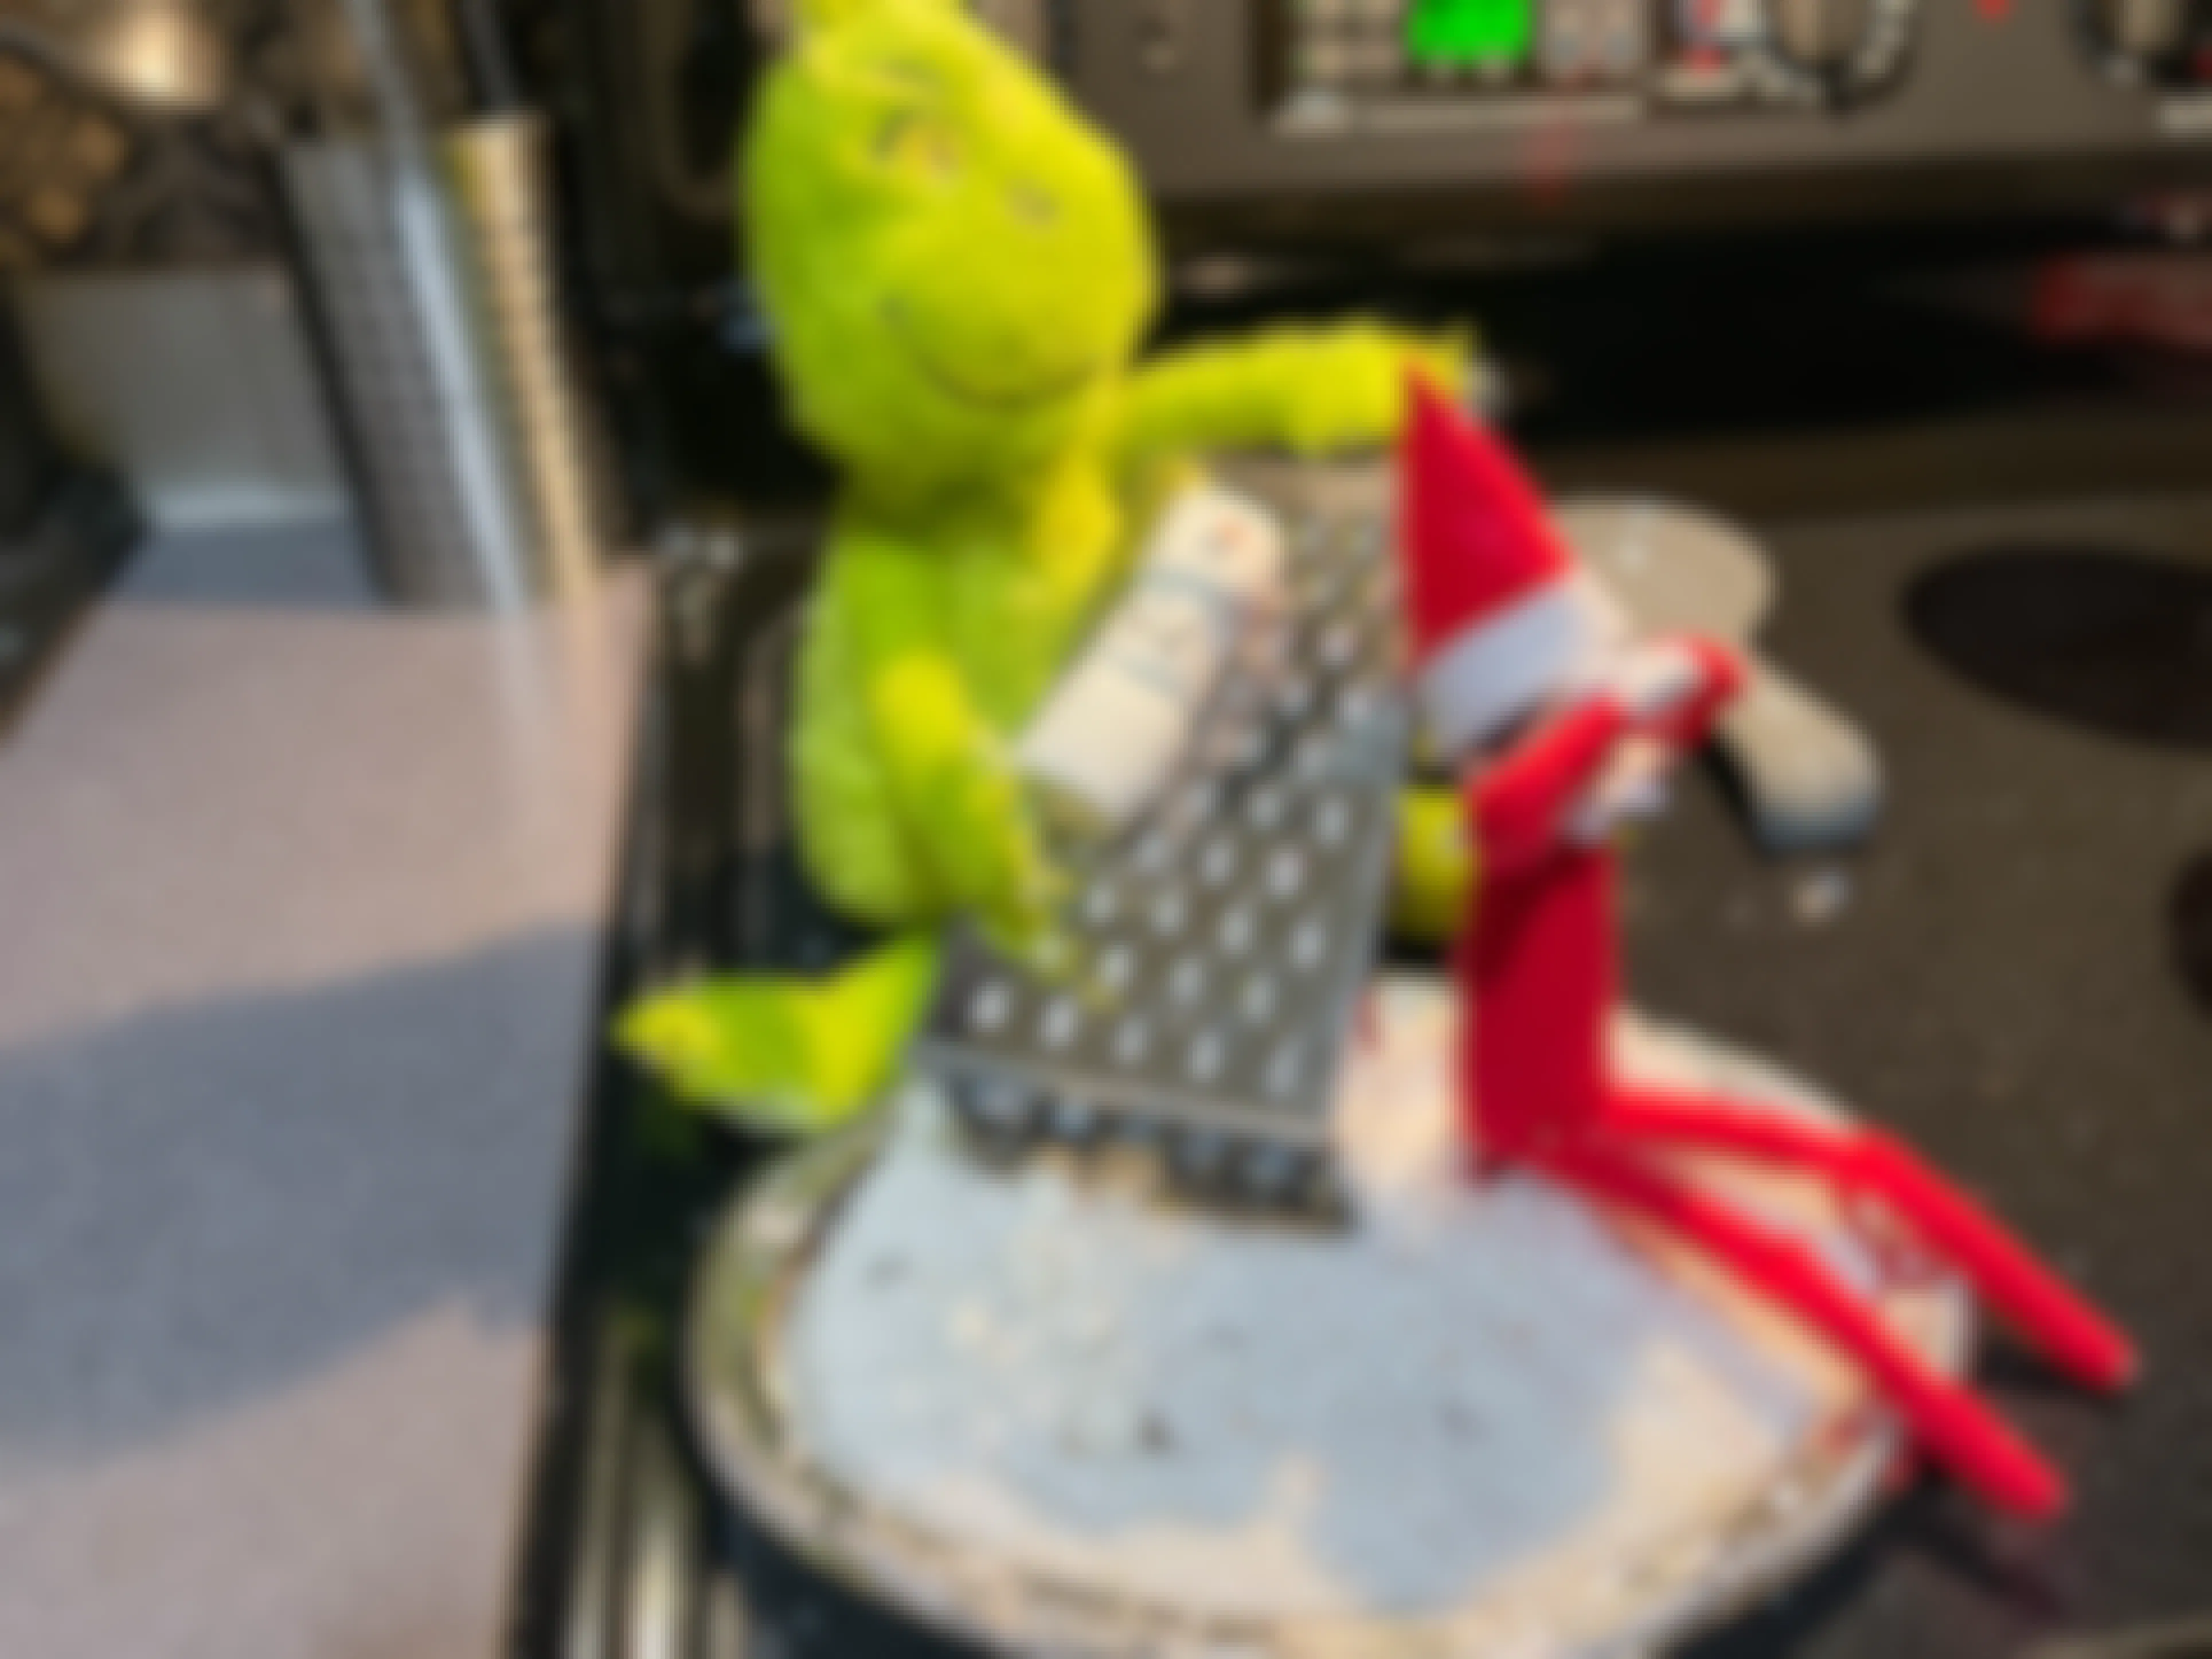 a grinch doll pretending to grate a marshmallow snowman next to a elf on the shelf doll